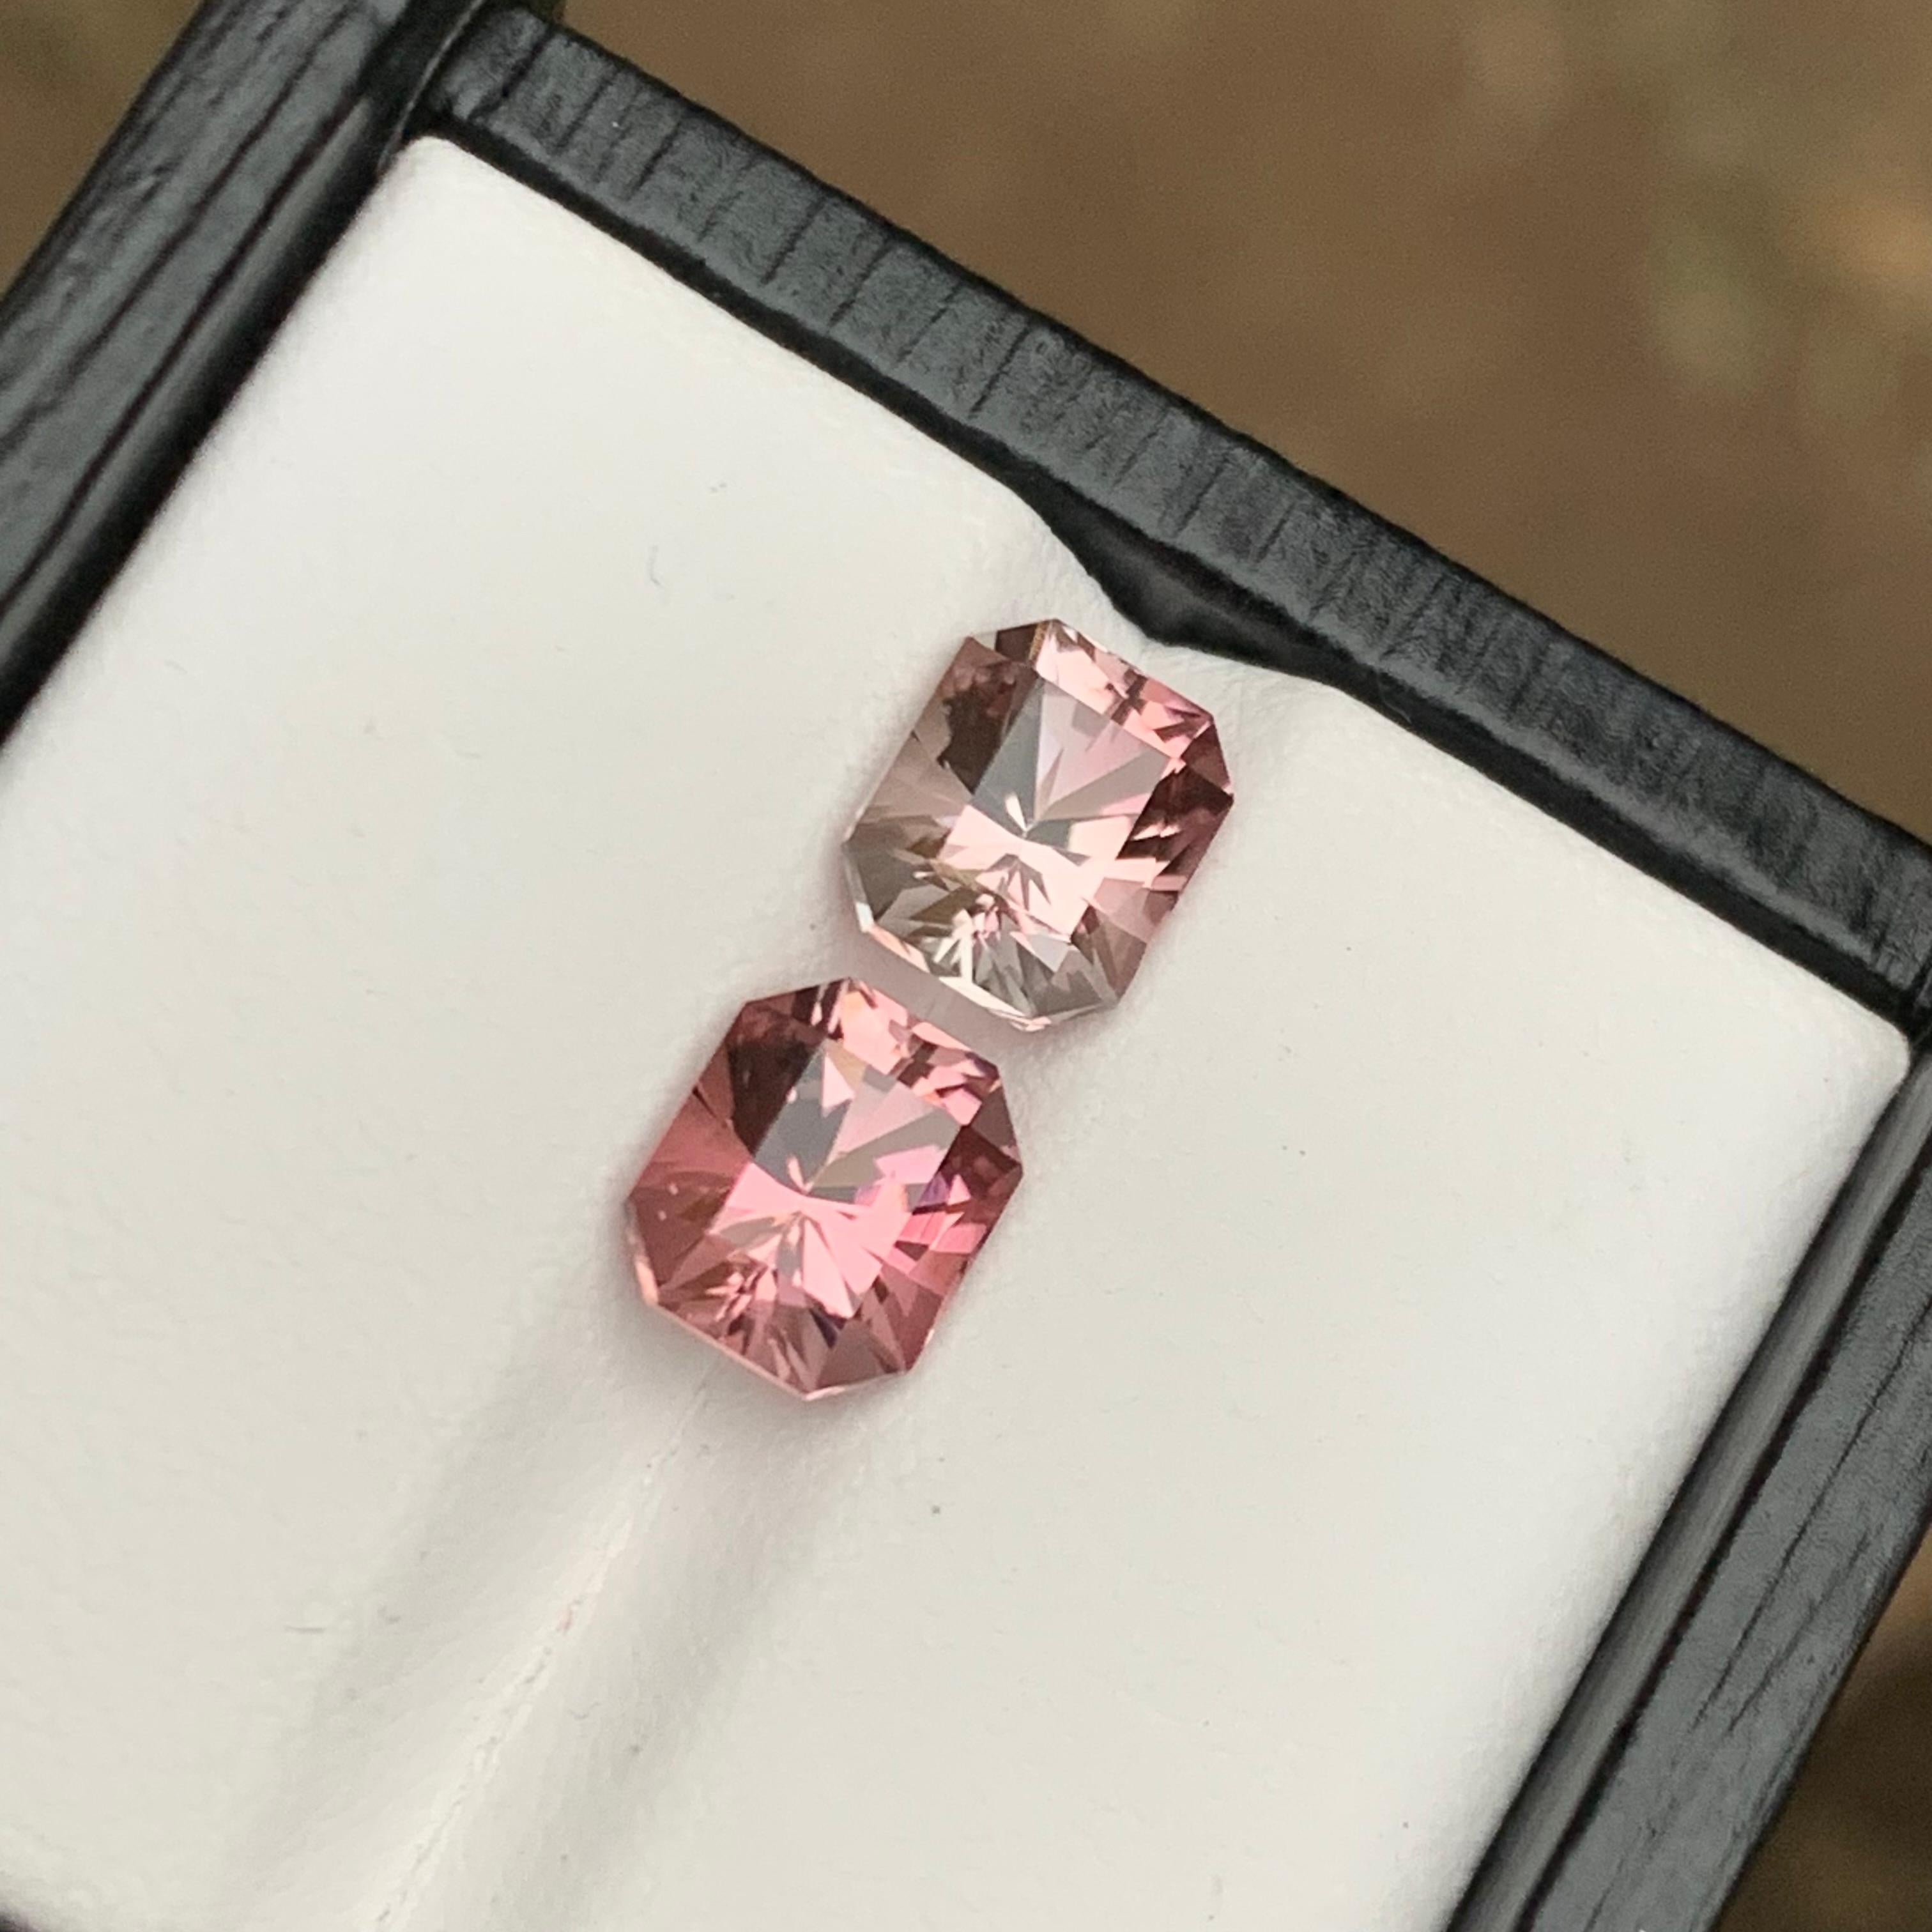 GEMSTONE TYPE: Tourmaline
PIECE(S): 2
WEIGHT: 3.80 Carat
SHAPE: Octagon Emerald Cut
SIZE (MM): 
1.95 Ct: 7.59 x 6.40 x 5.64
1.85 Ct: 7.59 x 6.44 x 5.47
COLOR: Pink
CLARITY: Eye Clean
TREATMENT: None
ORIGIN: Afghanistan
CERTIFICATE: On demand

Infuse